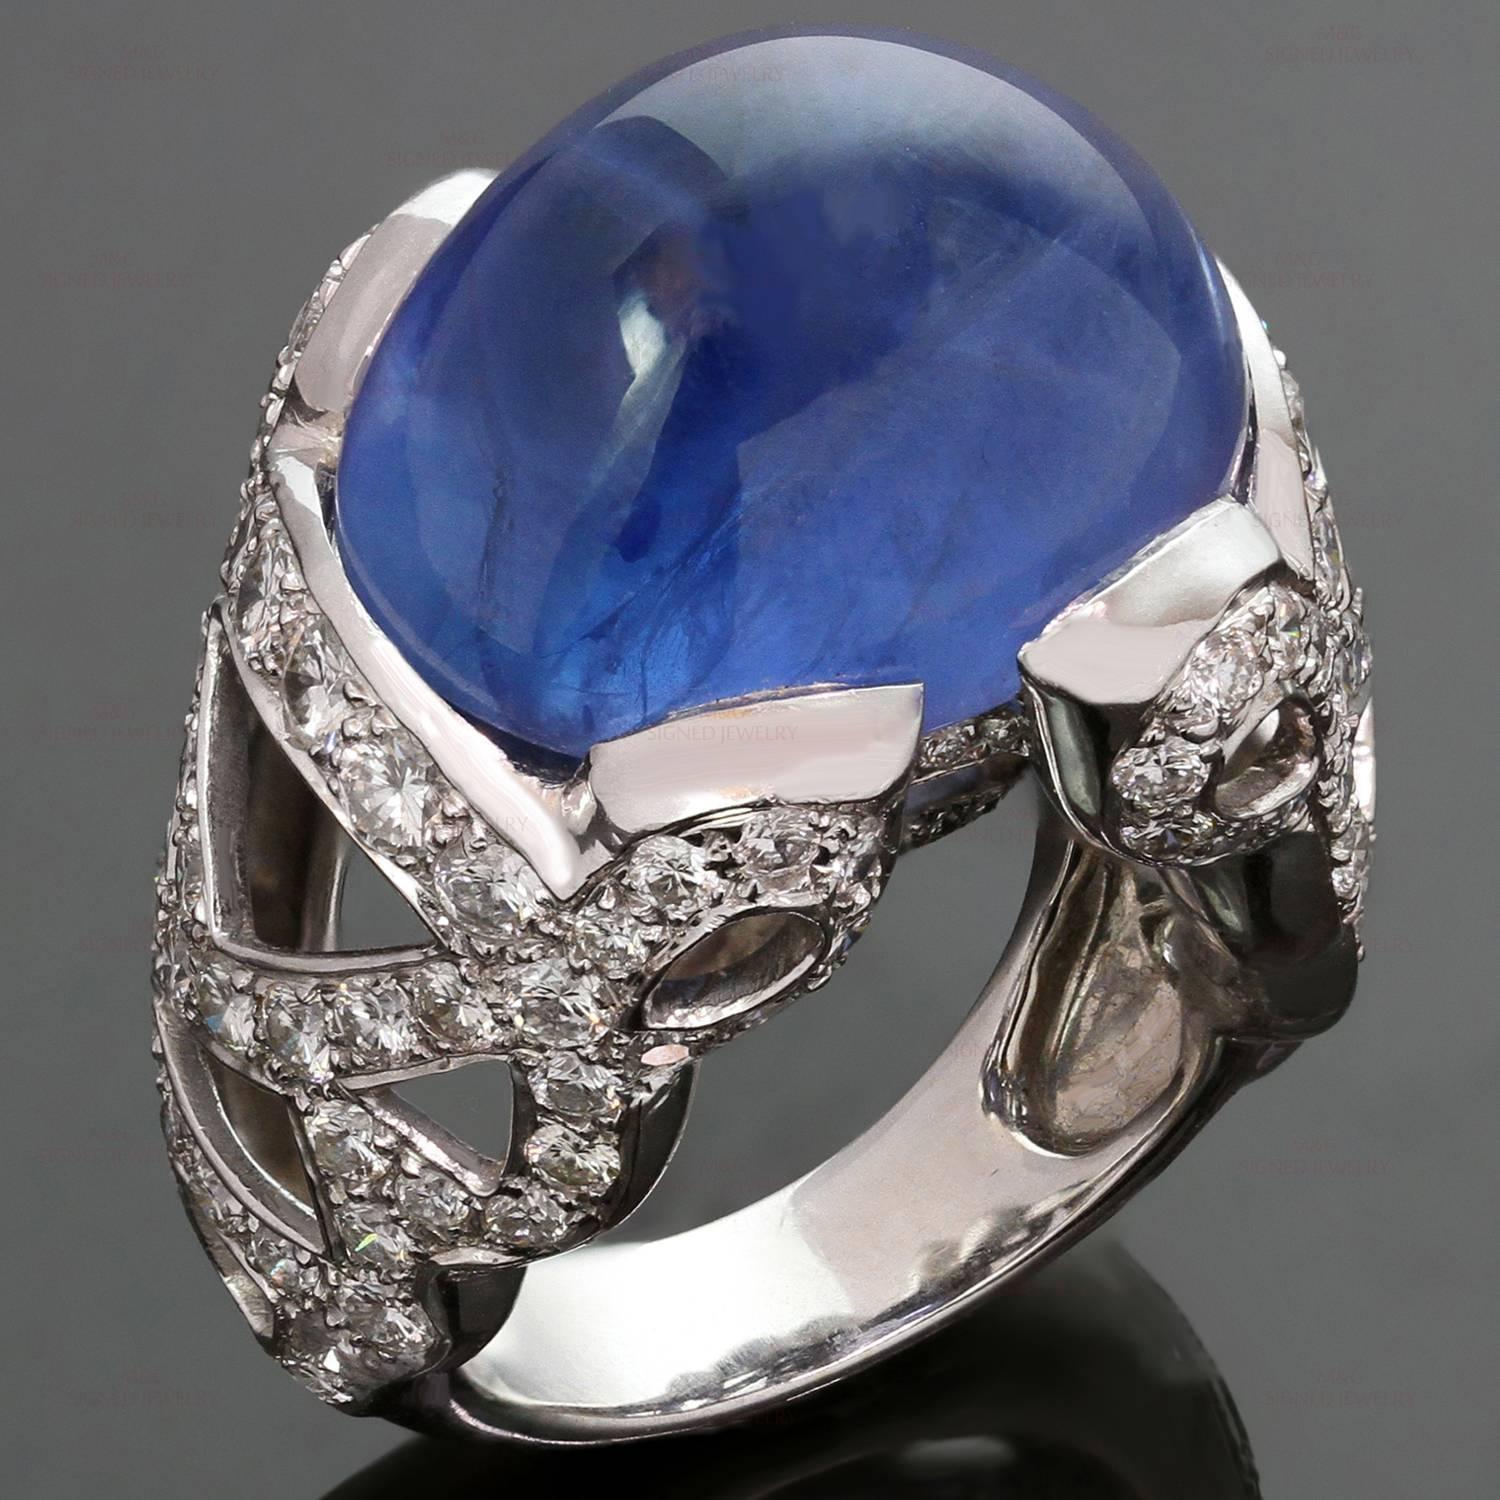 This magnificent dome ring is crafted in 18k white gold and pave-set with brilliant-cut round diamonds of an estimated 4.50 carats and a cabochon blue sapphire of an estimated 40.0 carats. All weights and measurements are approximate. Made in France